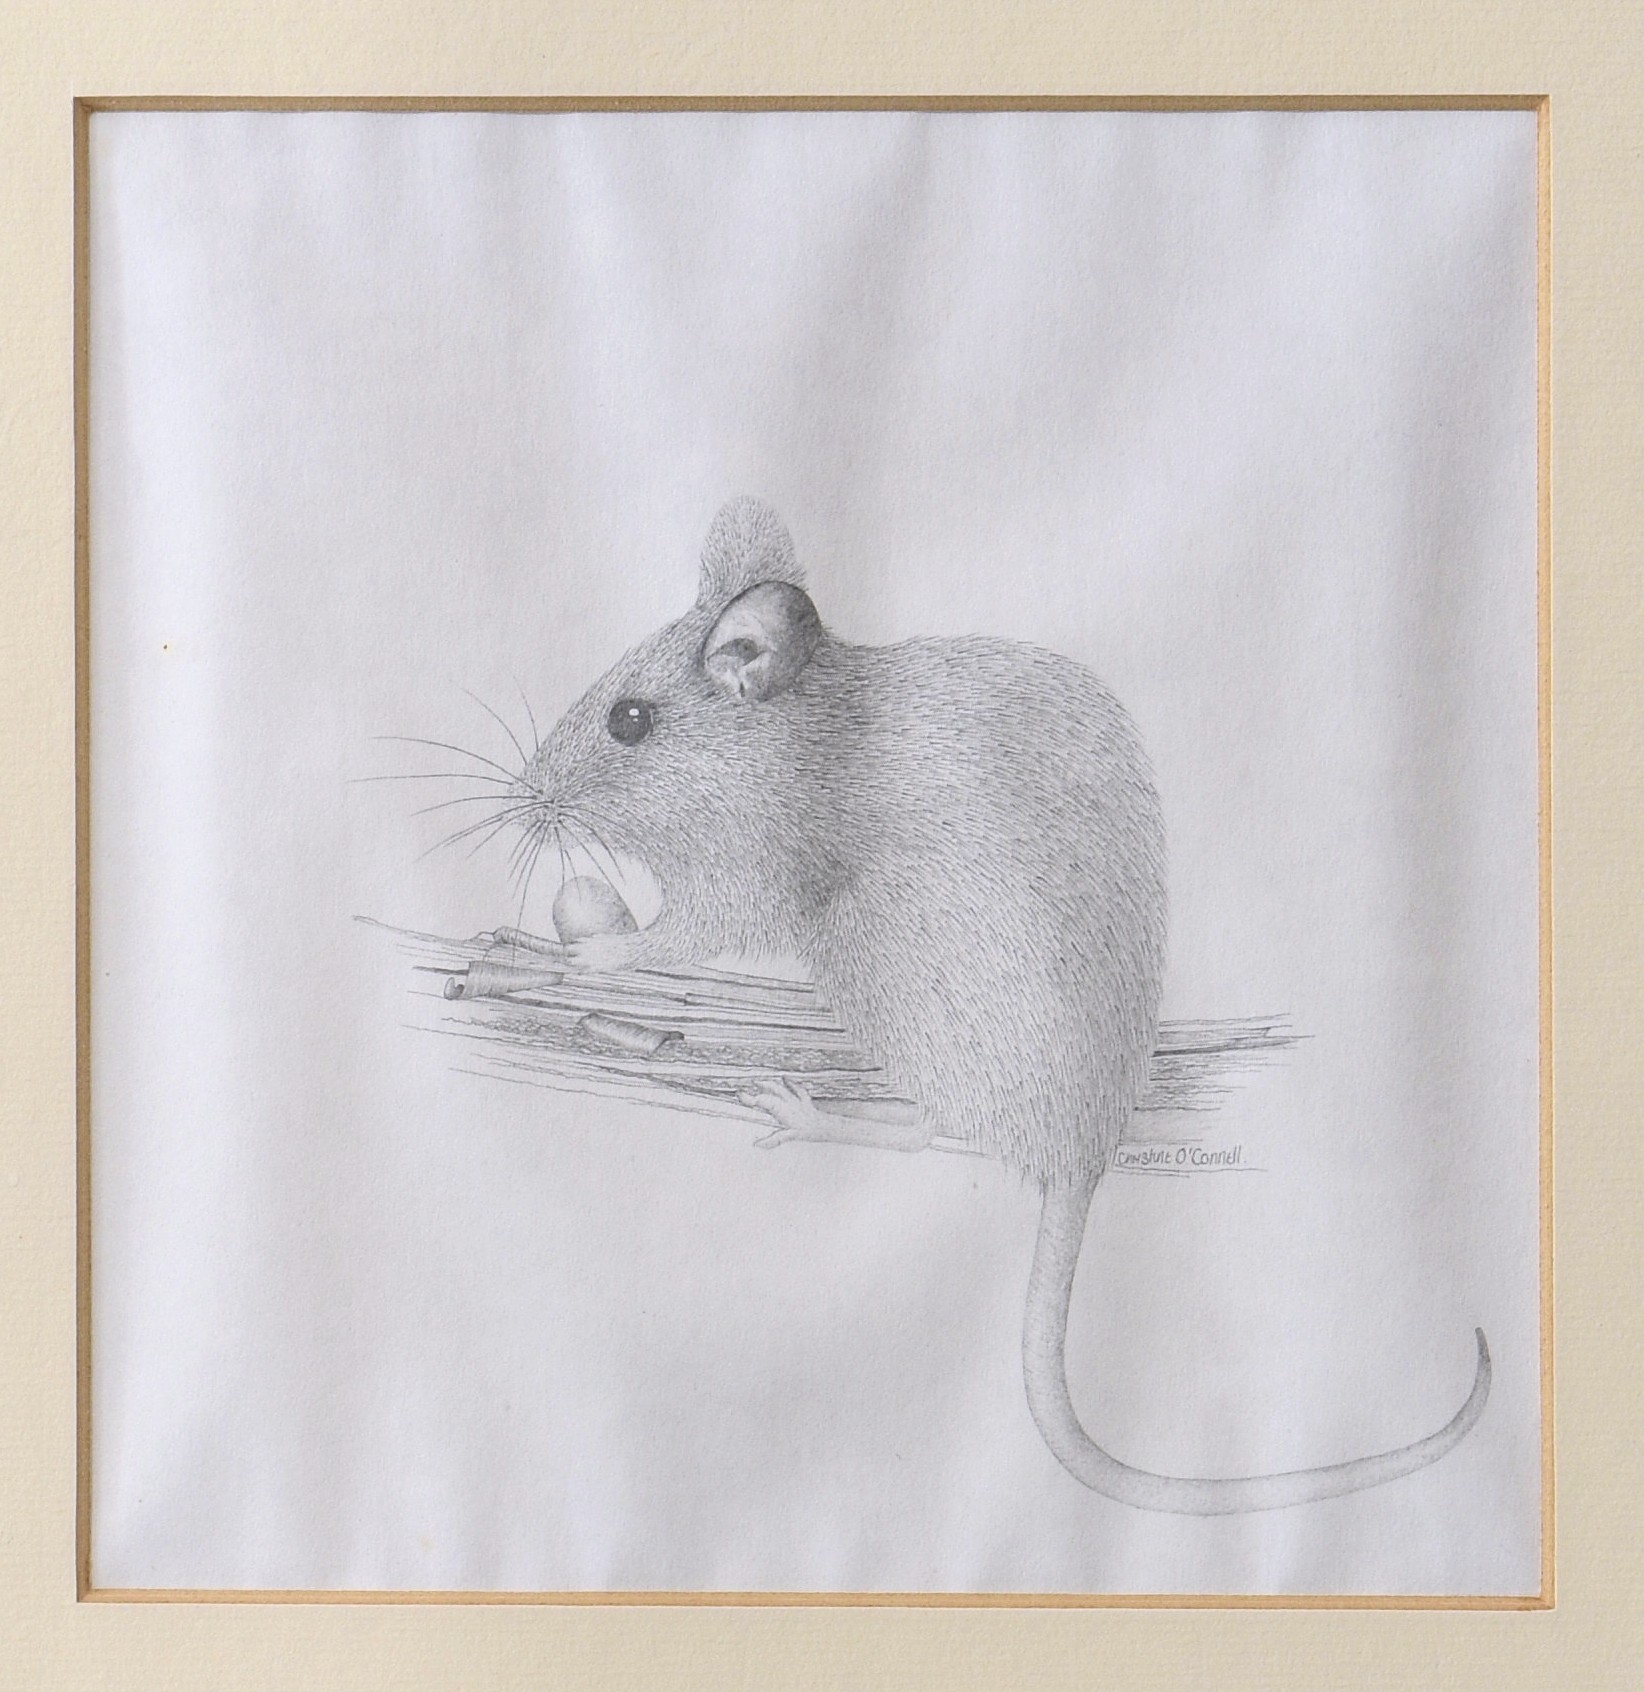 Christine O'Connell (late 20th century), "Doormouse", pencil, signed in pencil centre right, framed,